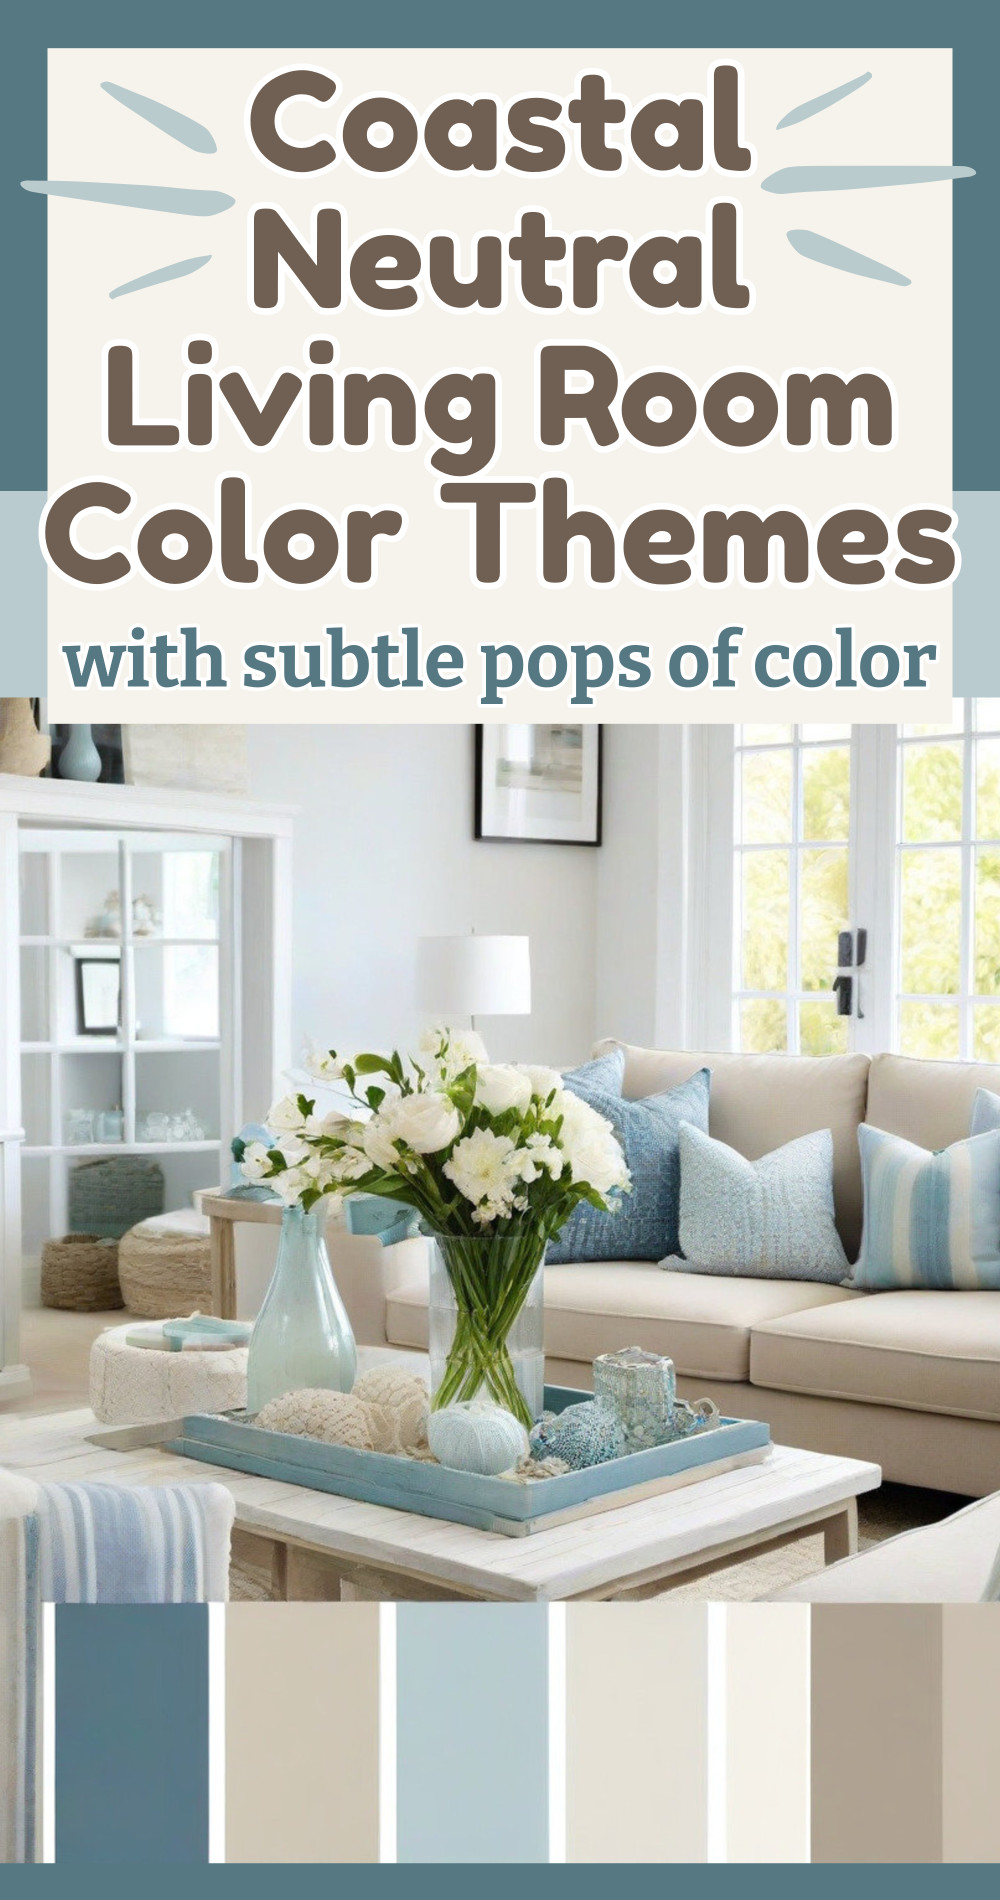 Coastal Neutral Living Room Color Thems With Subtle Chic Pops Of Color